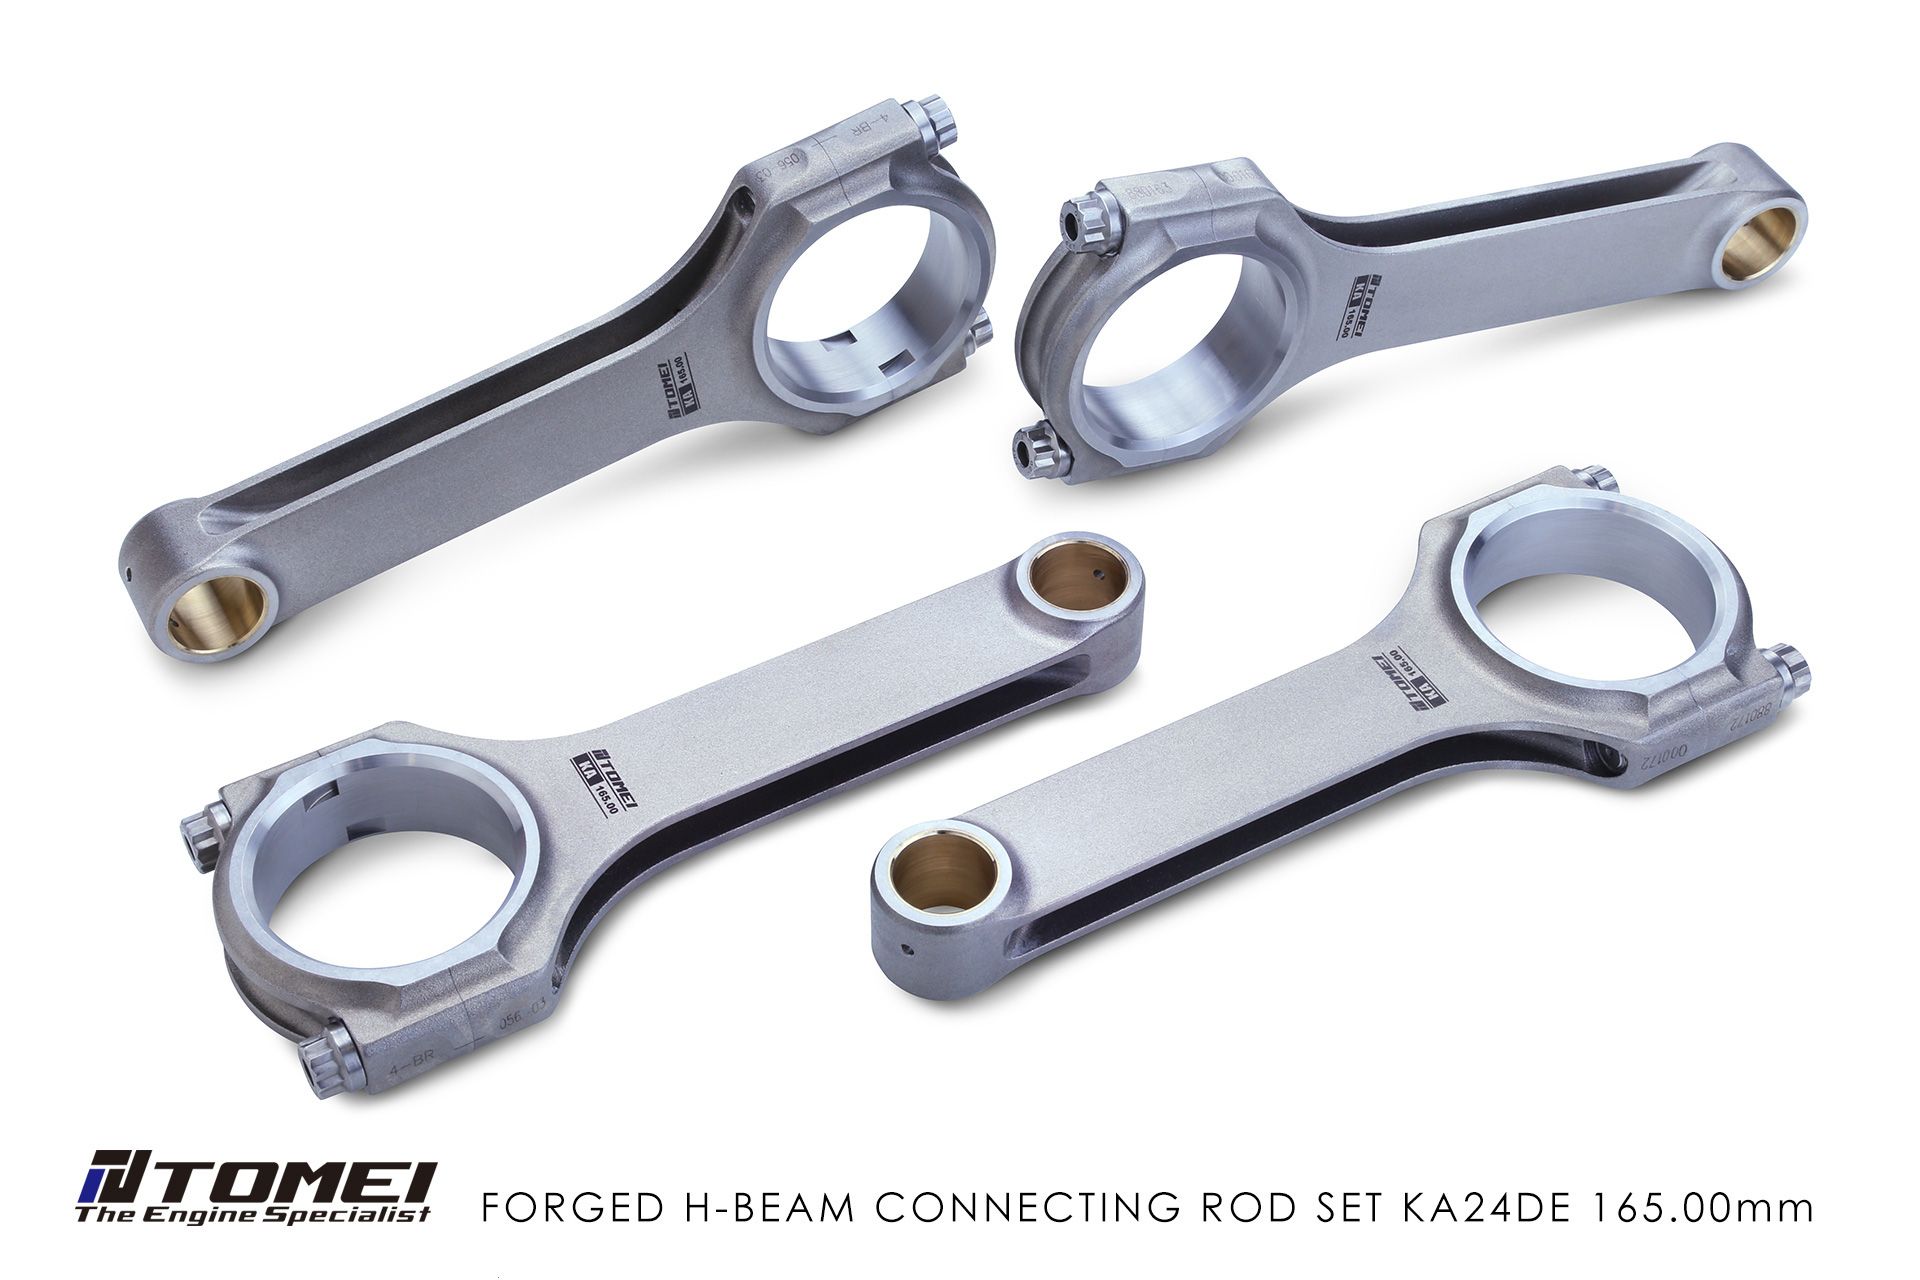 Tomei Forged H-Beam Connecting Rod Set KA24DE 165.00mm